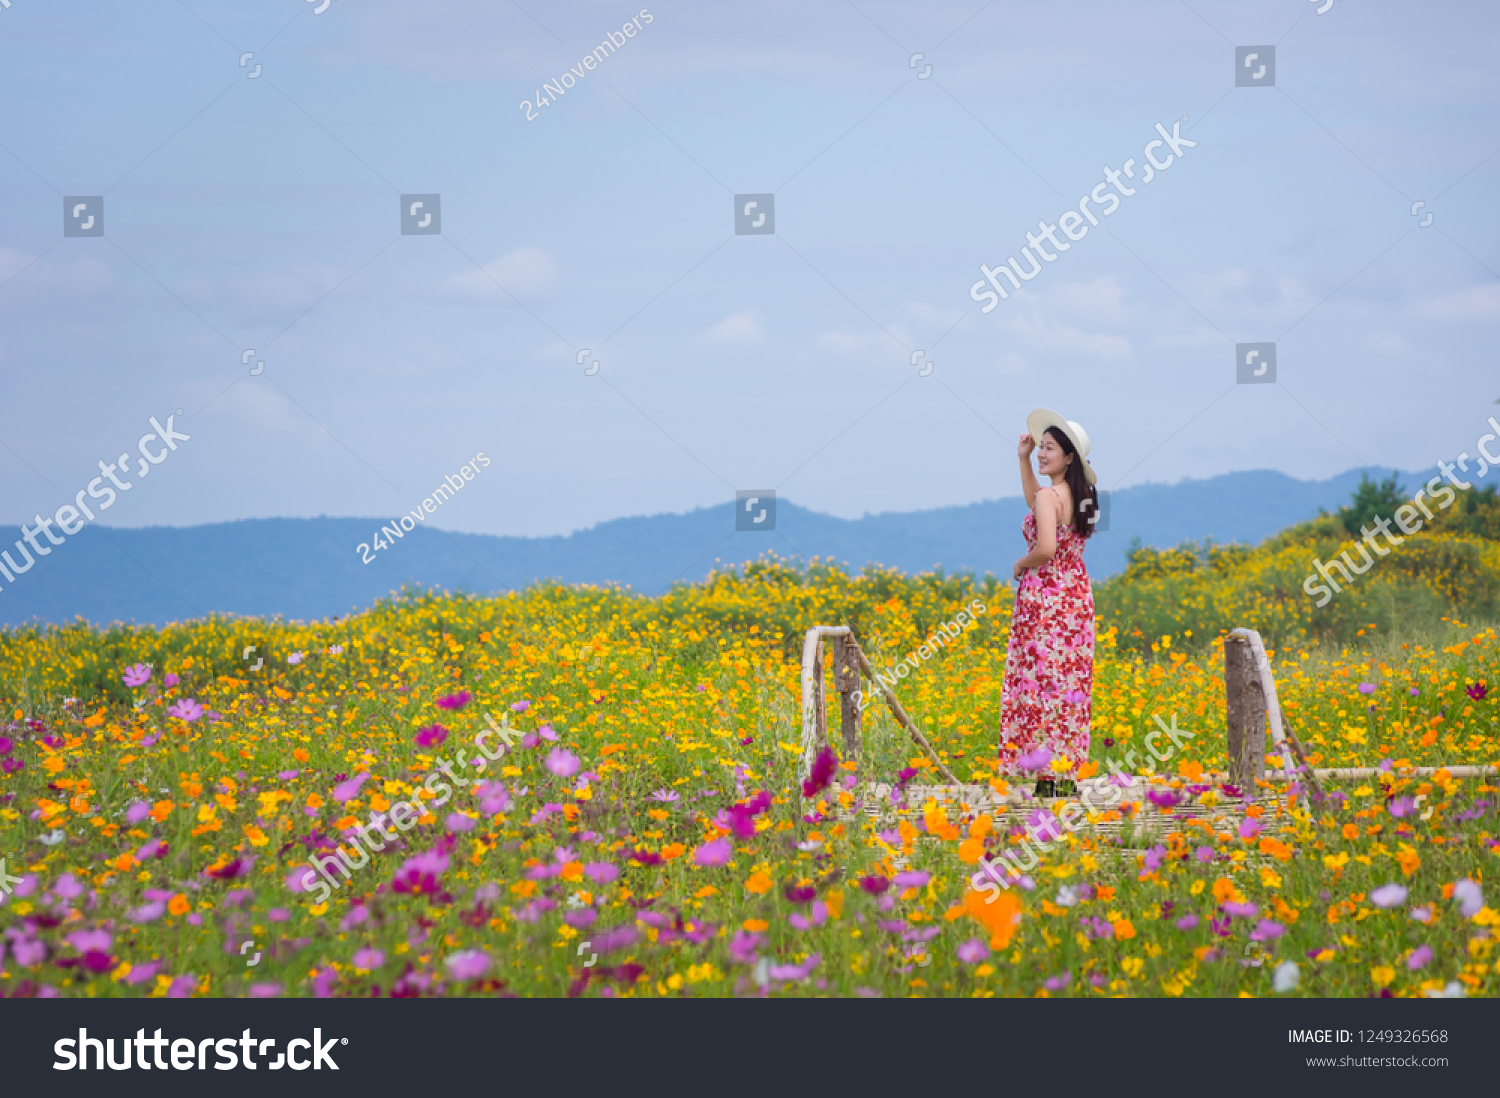 Beautiful woman in nature flower, Her wear white dresses and red hat in Tung Bua Tong Mexican sunflower field in Mae Moh Coal Mine, Lampang Province, Thailand. #1249326568